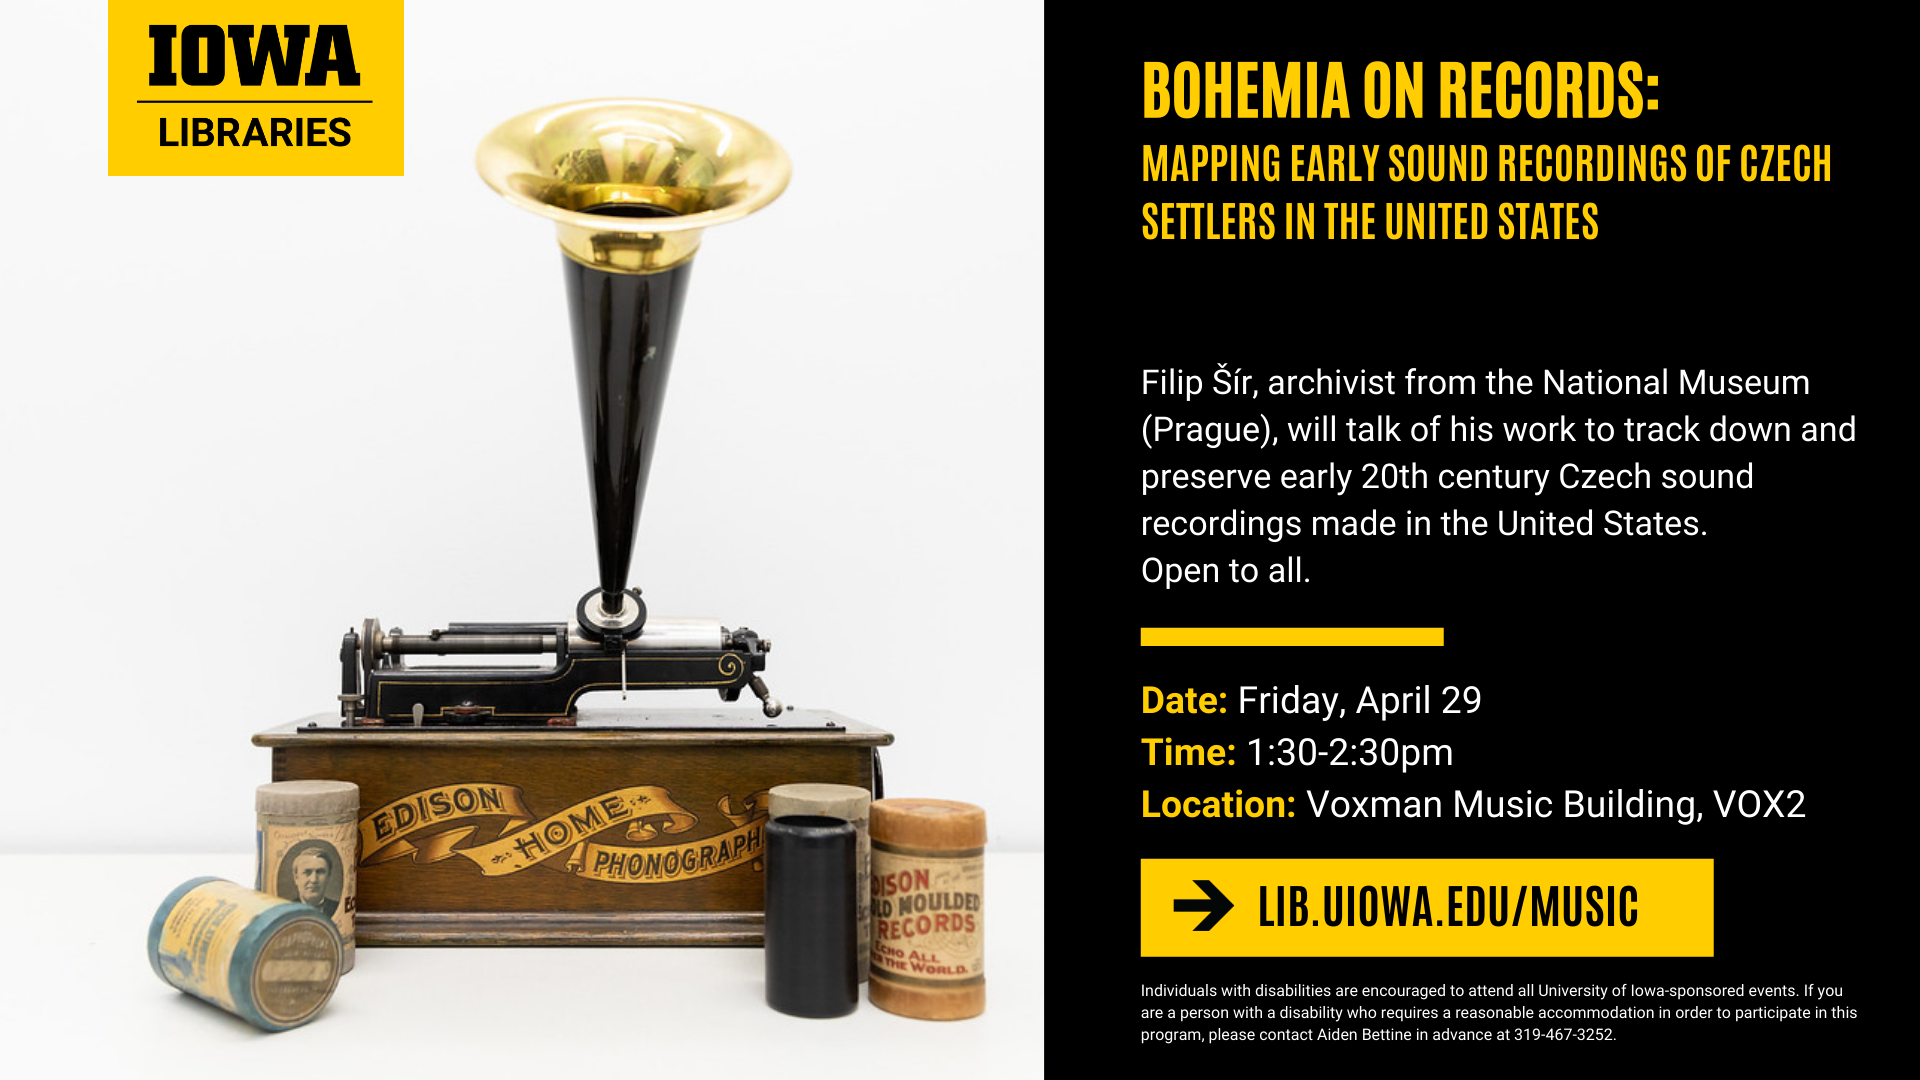 Bohemia on Records: Mapping early sound recordings of Czech Settlers in the United States. Filip Sir, acrhivist from the National Museum (Prague), will talk of his early work to track down and preserve early 20th century Czech sound recordings made in the United States. Open to all. Friday, April 29 at 1:30 p.m. Voxman Music Building, VOX2. More info at lib.uiowa.edu/music. Individuals with disabilities are encouraged to attend all University of Iowa-sponsored events. If you are person with a disability who requires a reasonable accommodation in order to participate in this program, please contact Aiden Bettine in advance at 319-467-3252.